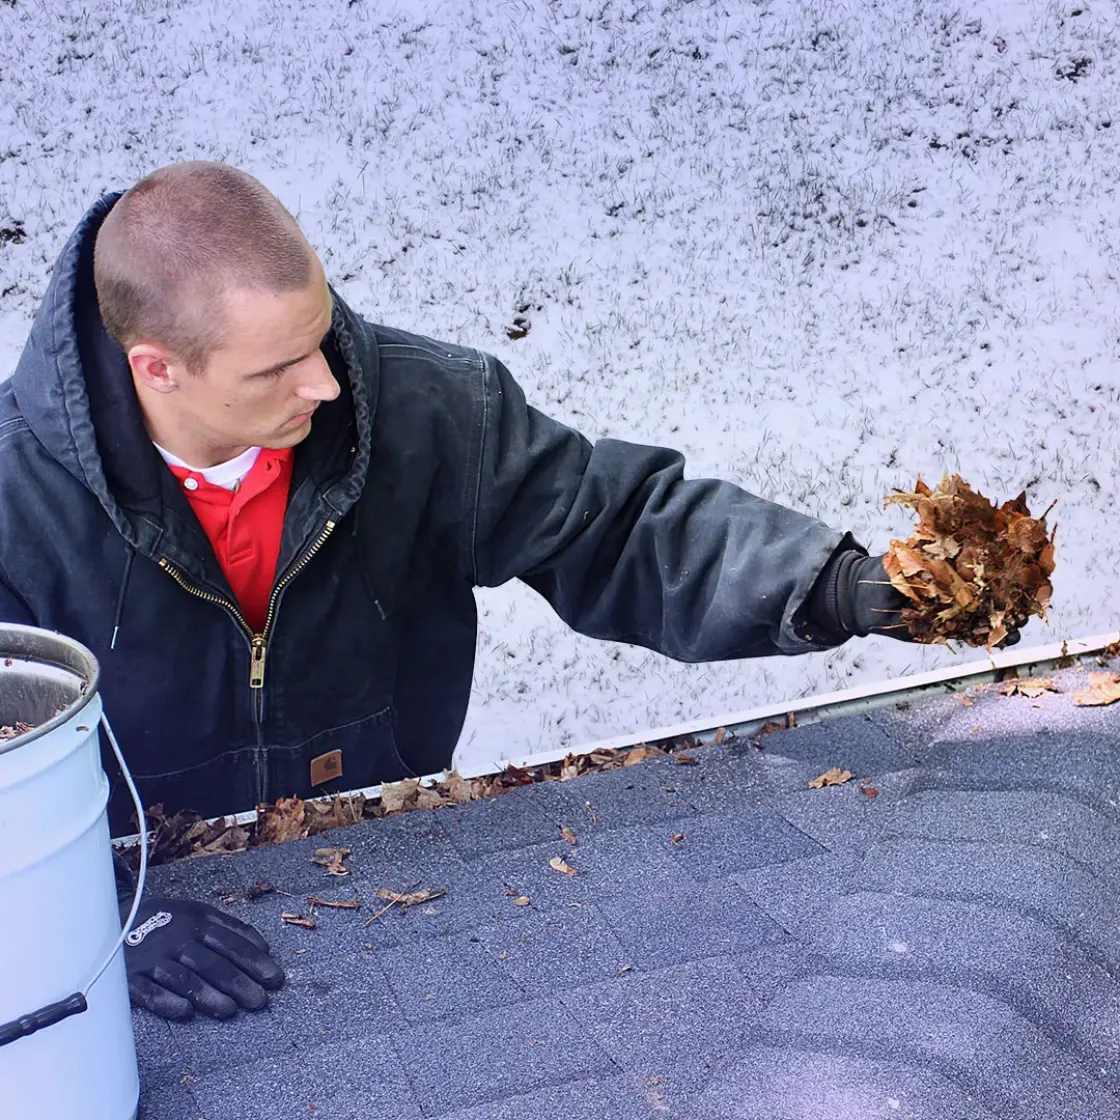 A gutter cleaner perches alongside a roof to clean gutters. Snow covers the grass in the background.